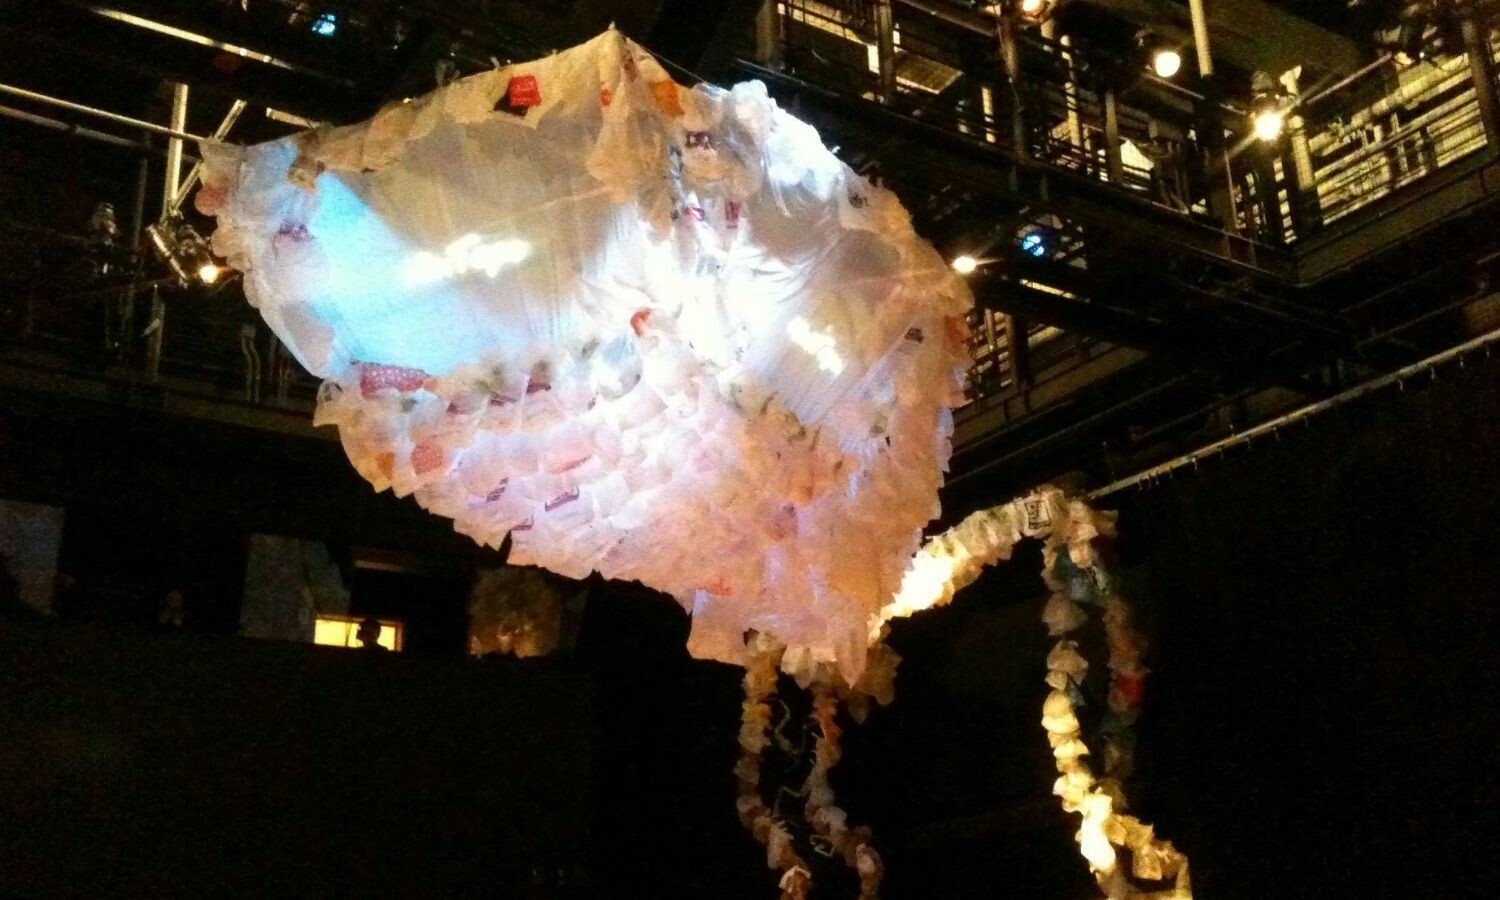 A floating jellyfish-like figure made out of a large sheet and plastic bags.